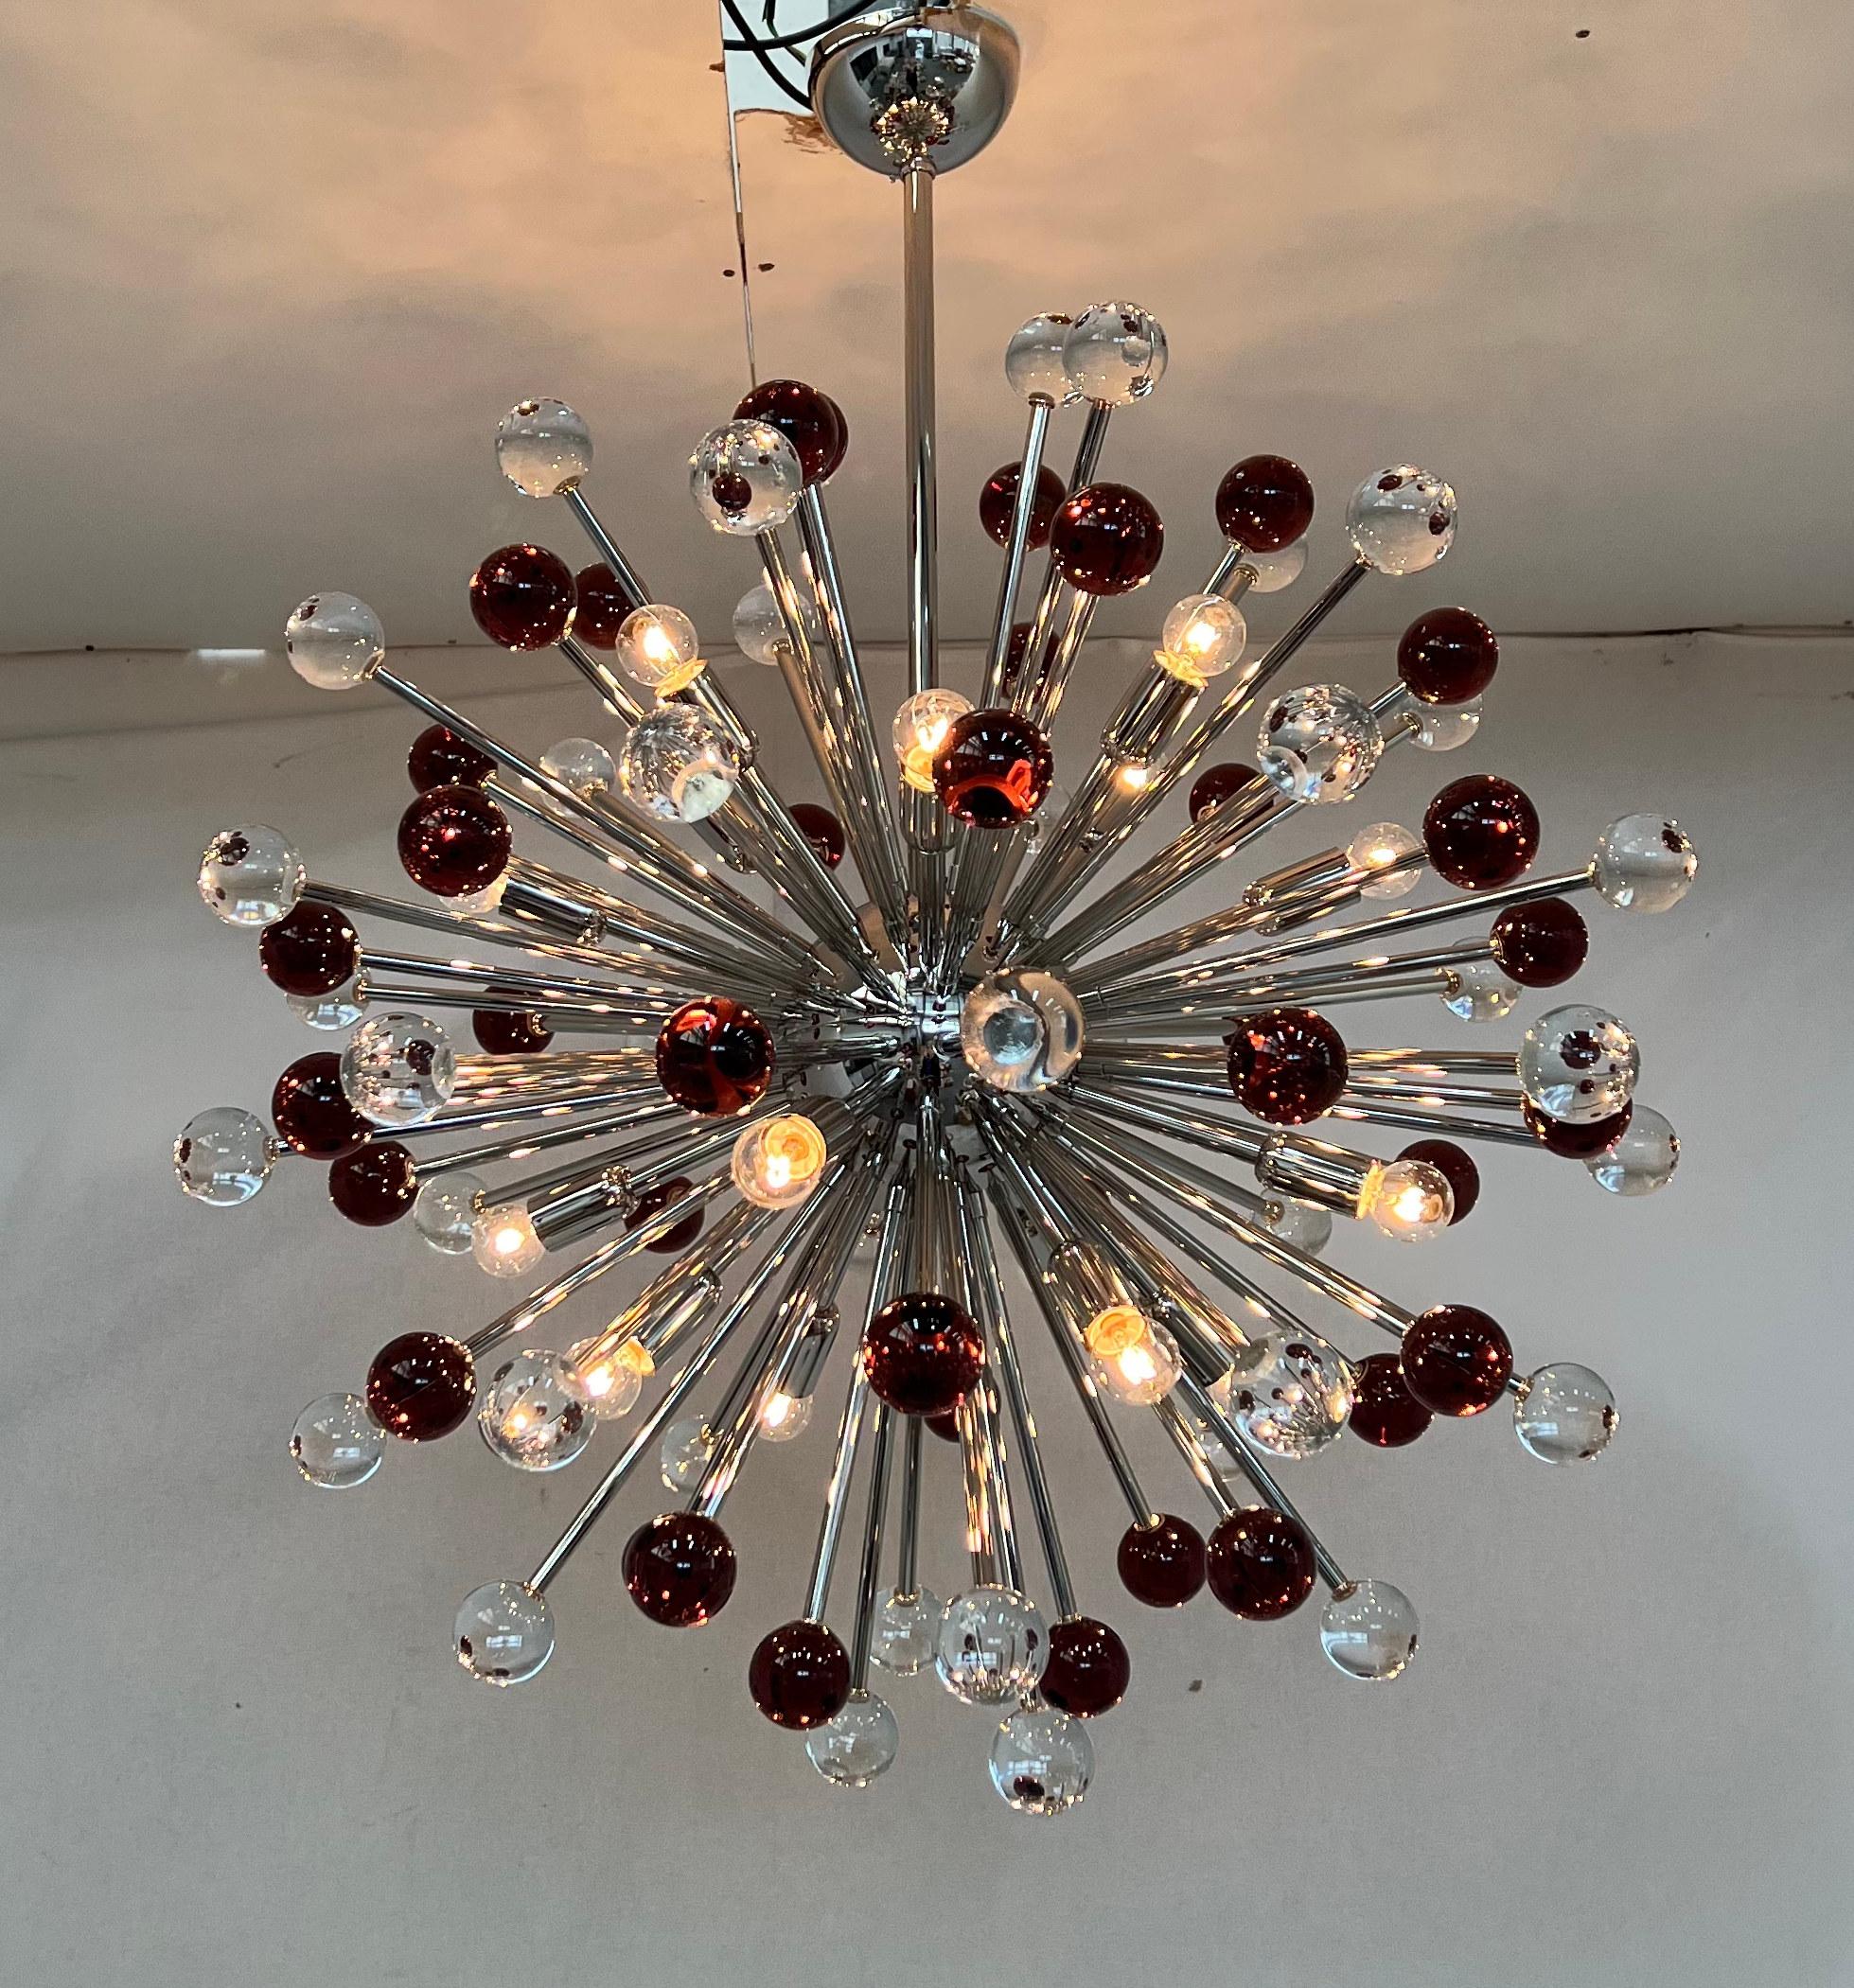 Italian modern Sputnik chandelier with hand blown clear and purple Murano glass spheres, mounted on polished nickel finish metal frame / Designed by Fabio Bergomi for Fabio Ltd / Made in Italy
16 lights / E12 or E14 type / max 40W each
Measures: